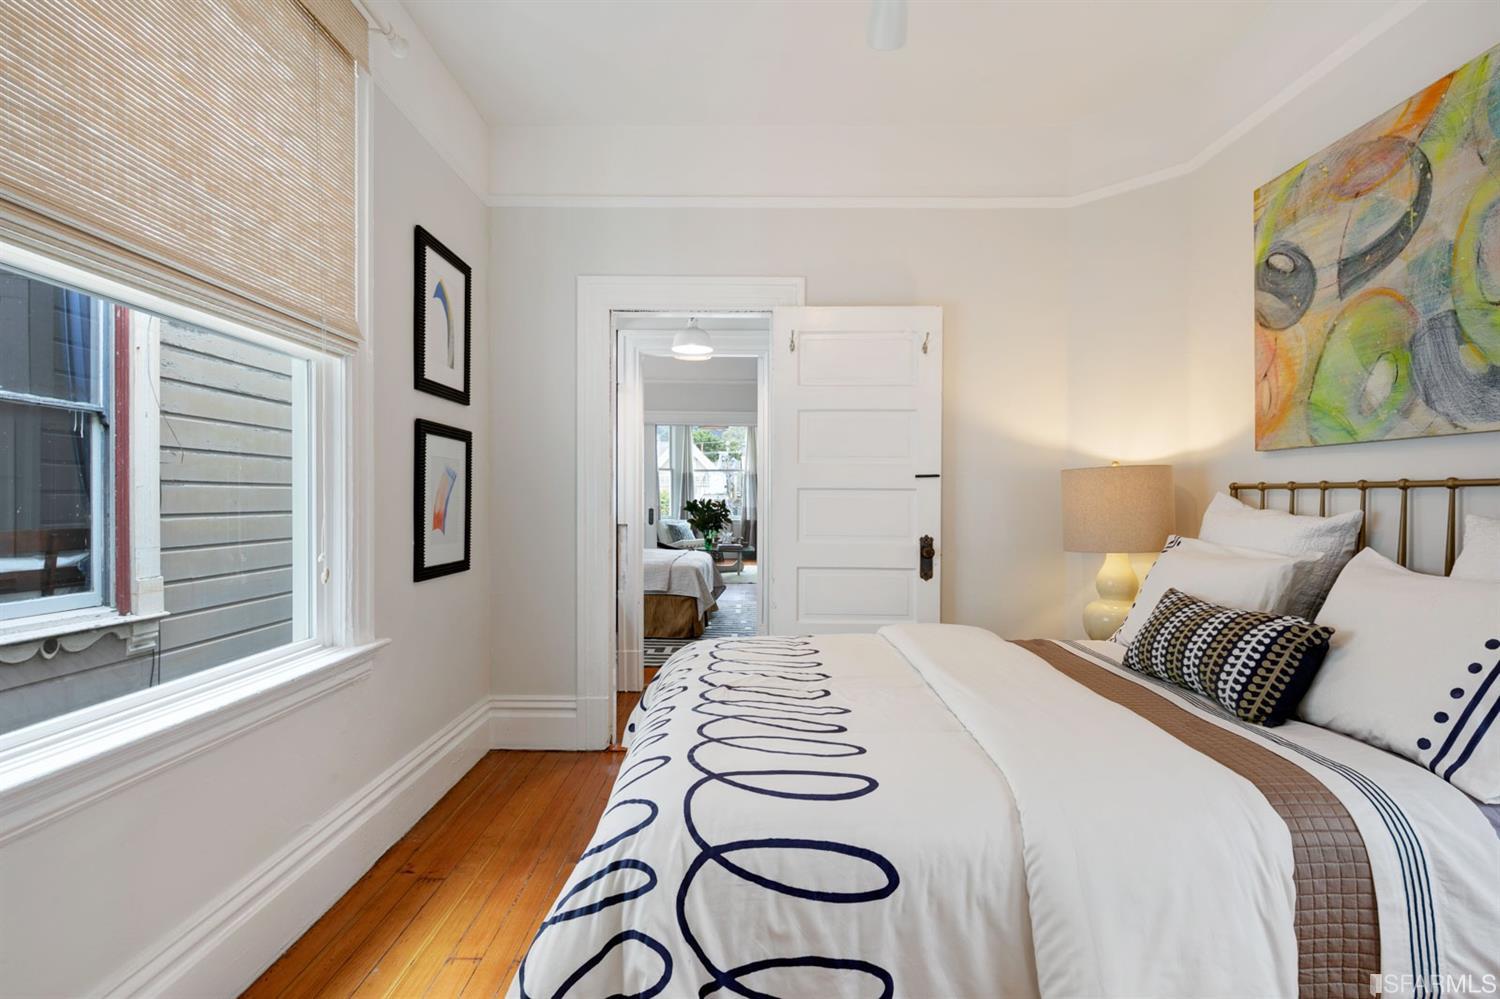 Property Photo: View of another bedroom with wood floors and crown moulding